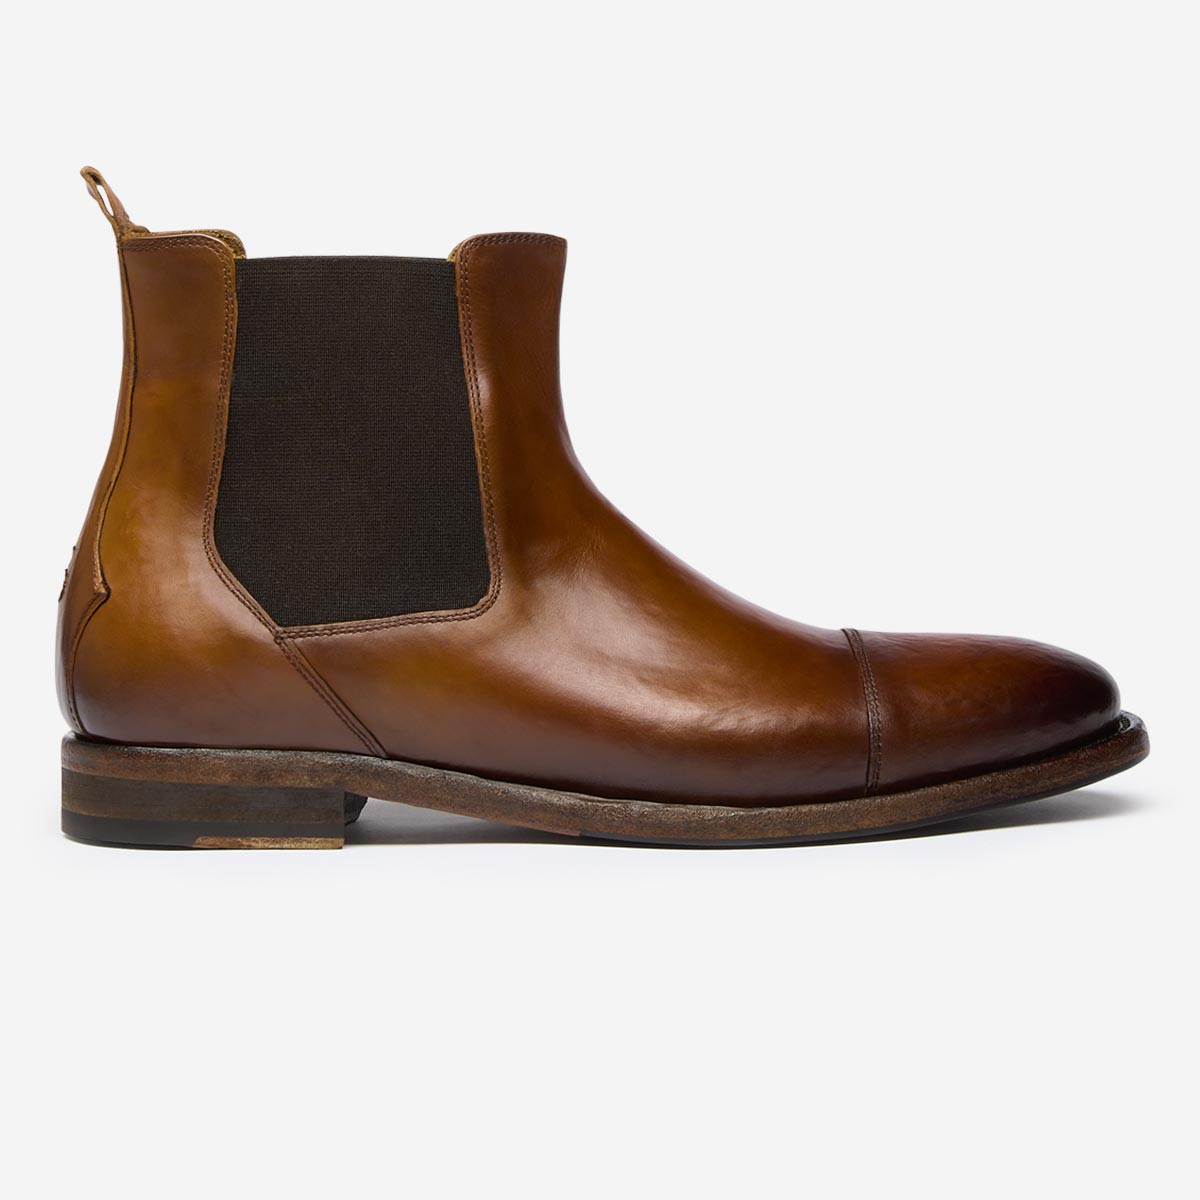 Cadotto Dark Tan Chelsea Boots | Men's Boots | Oliver Sweeney